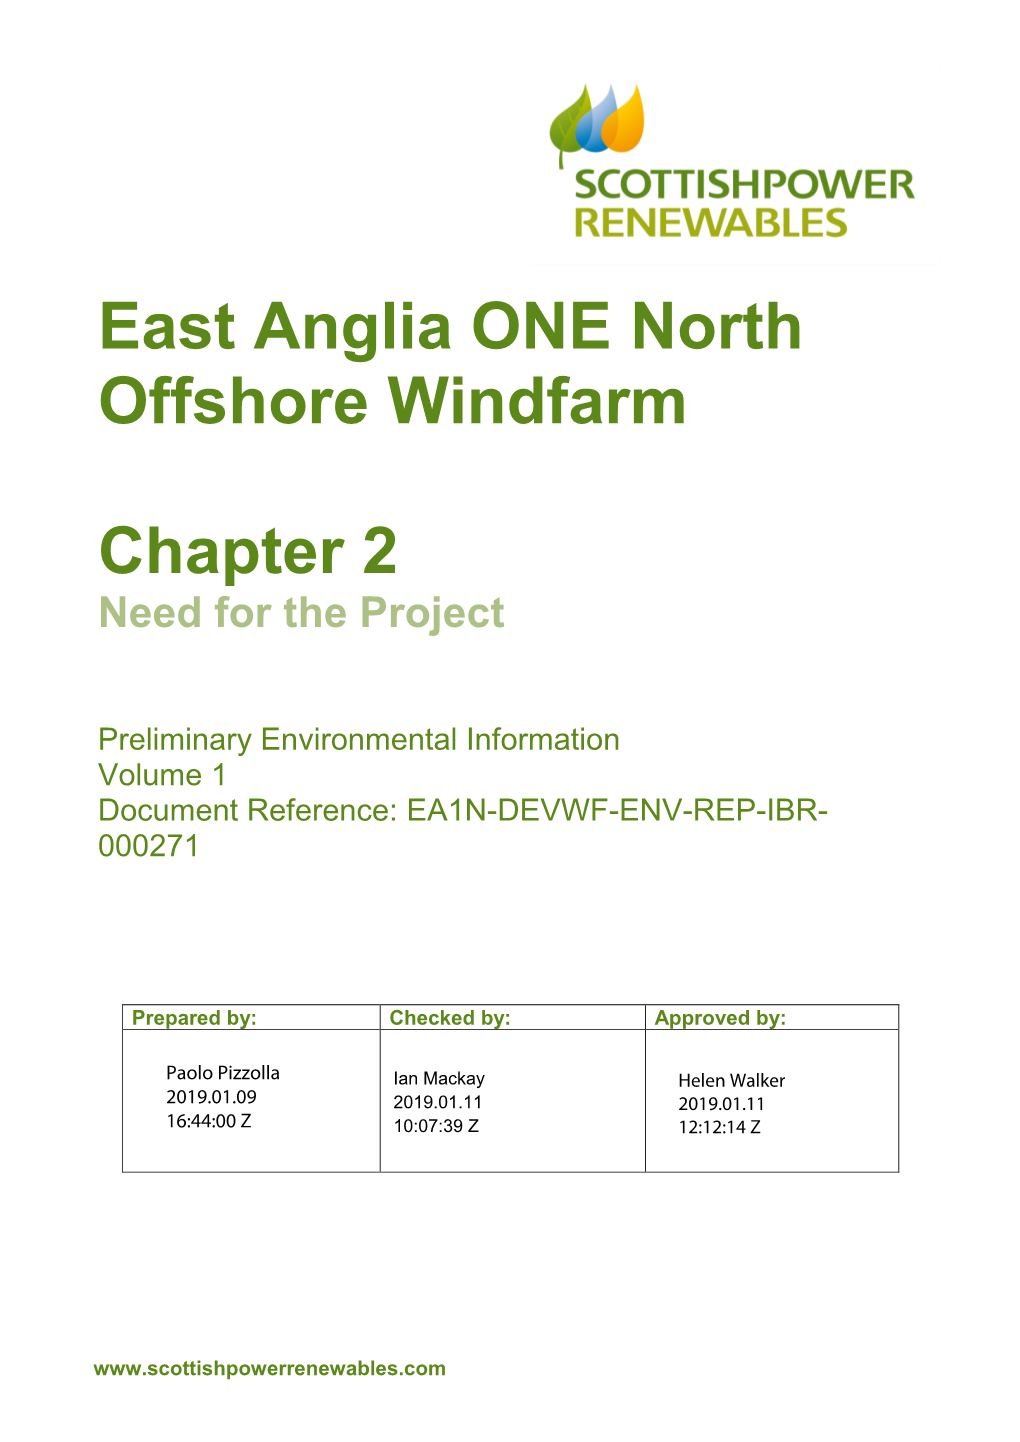 East Anglia ONE North Offshore Windfarm Chapter 2